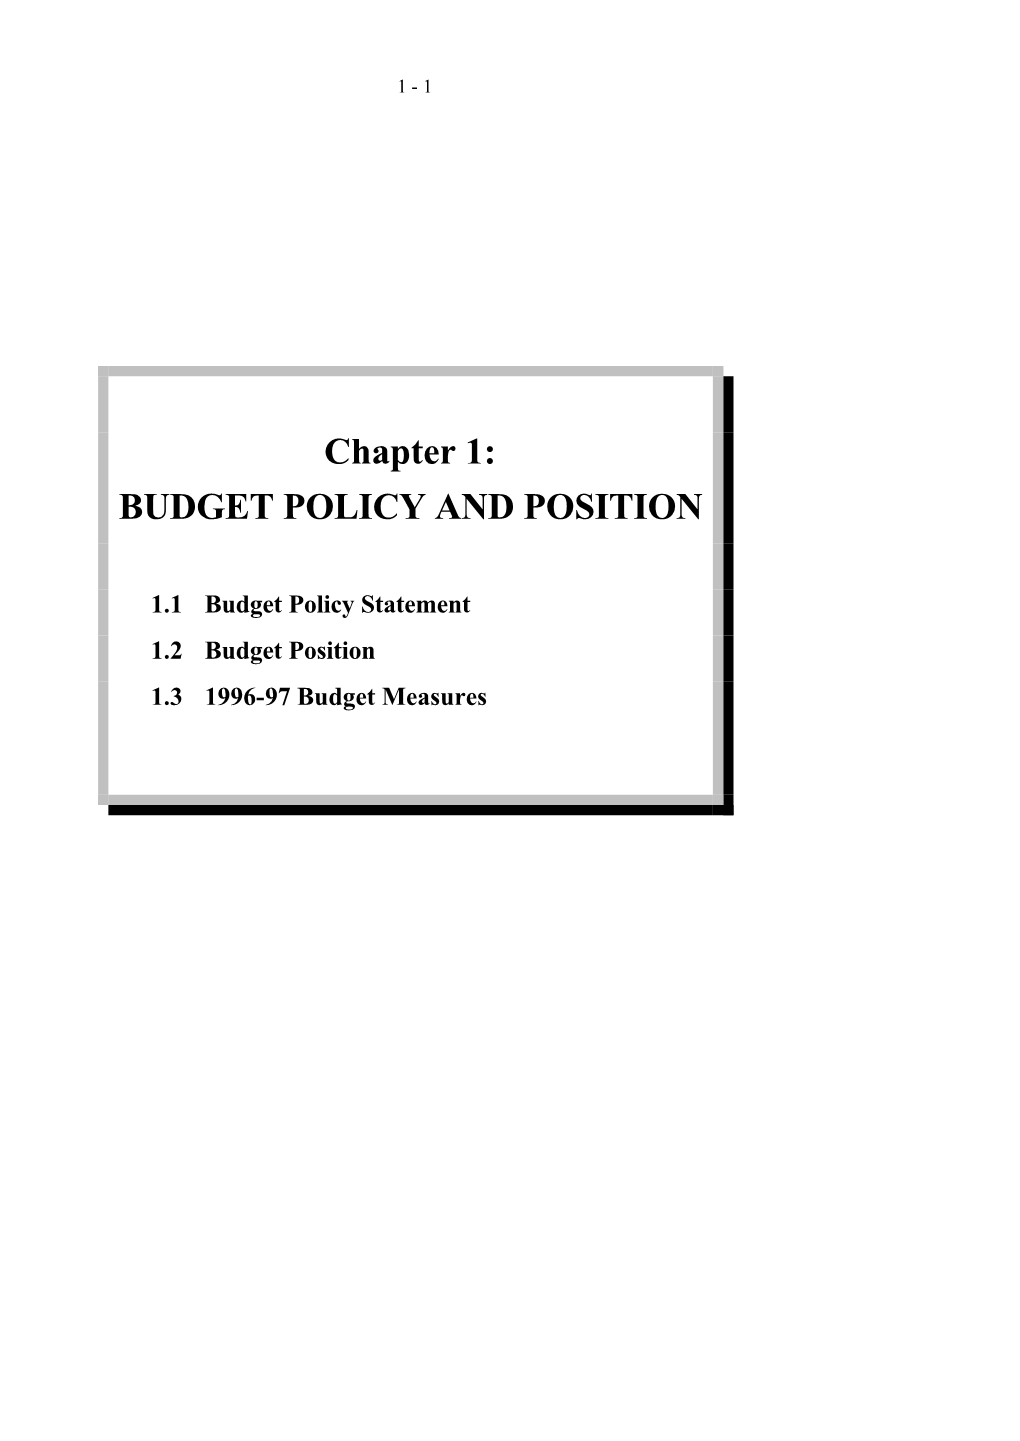 Budget Policy and Position